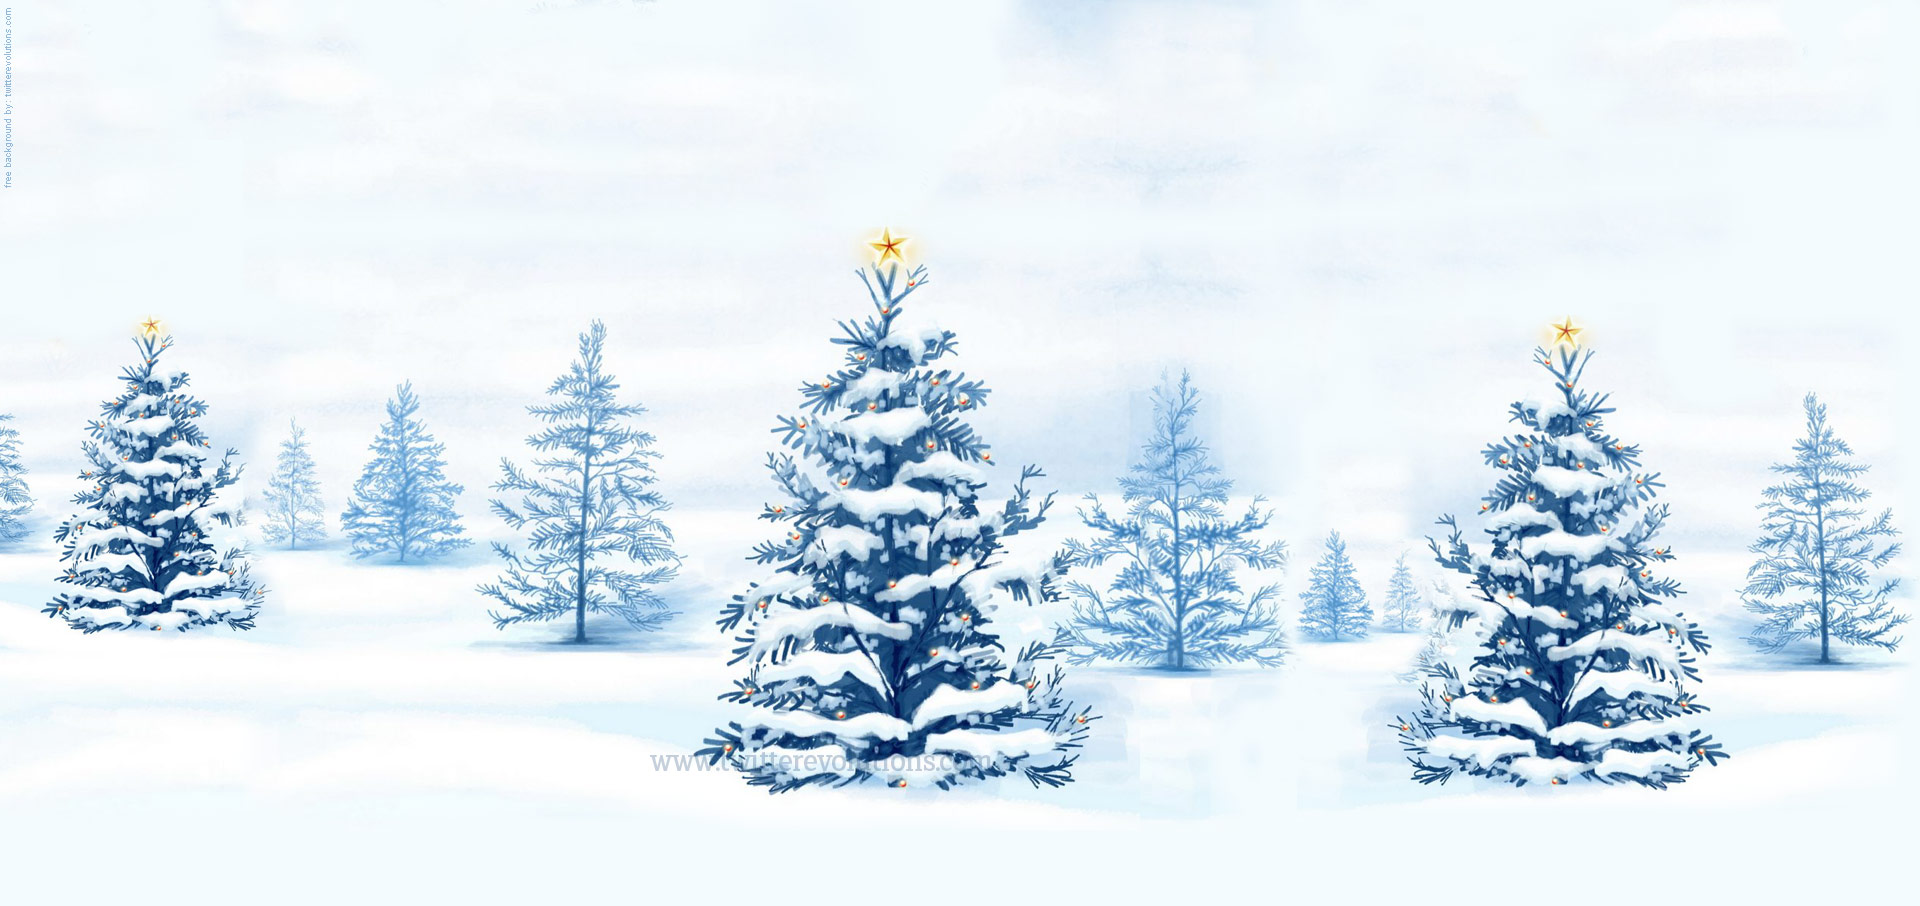 Winter Snowy Christmas Trees Background Evolutions